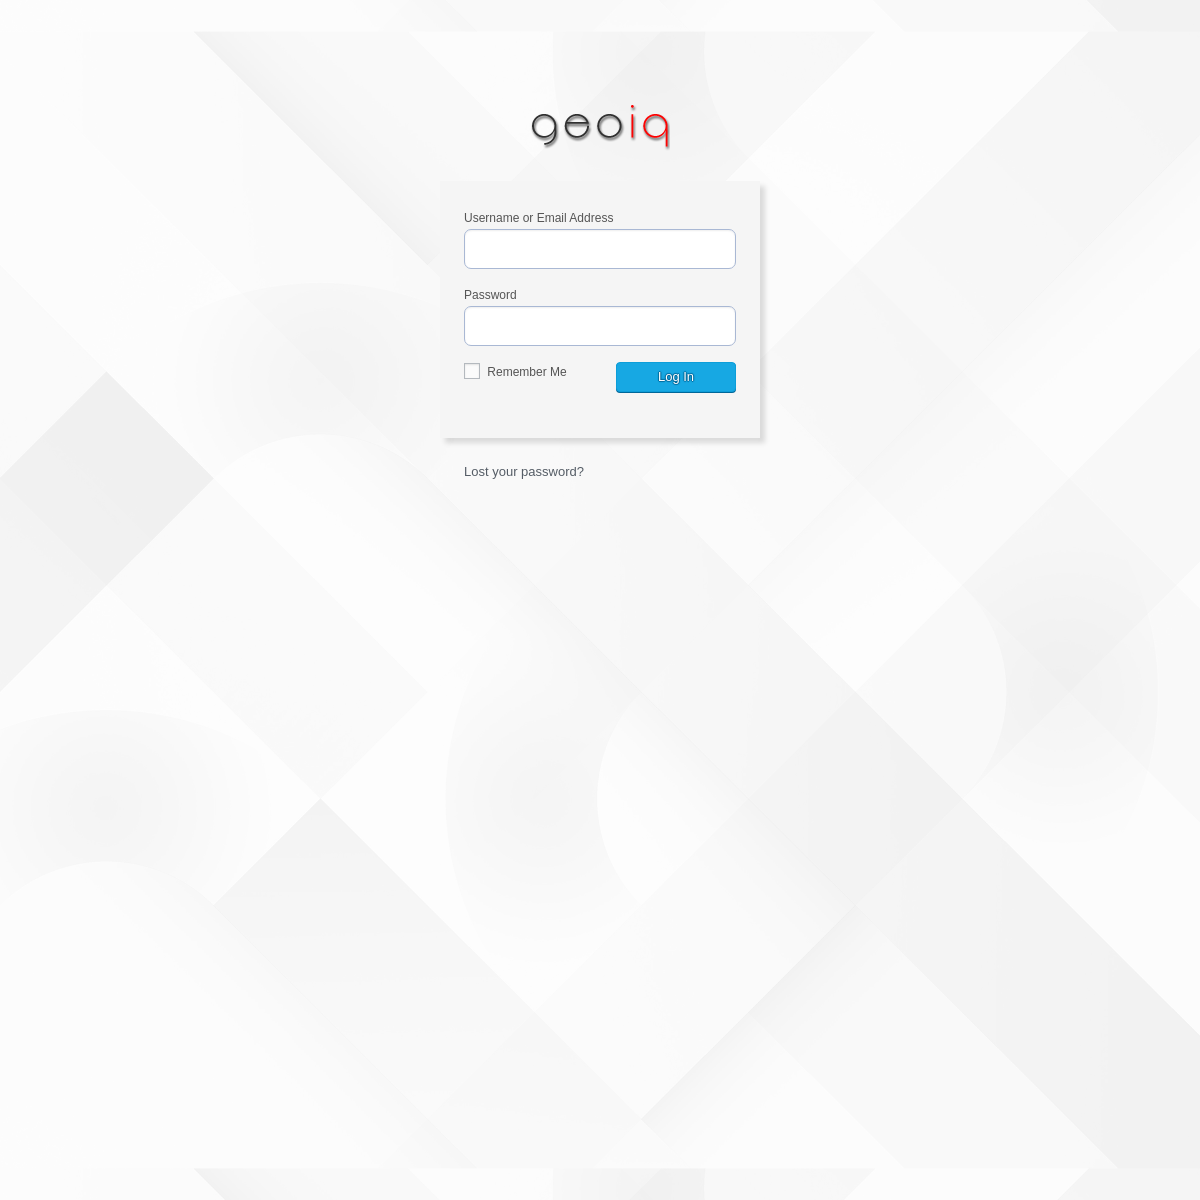 A complete backup of geoiq.com